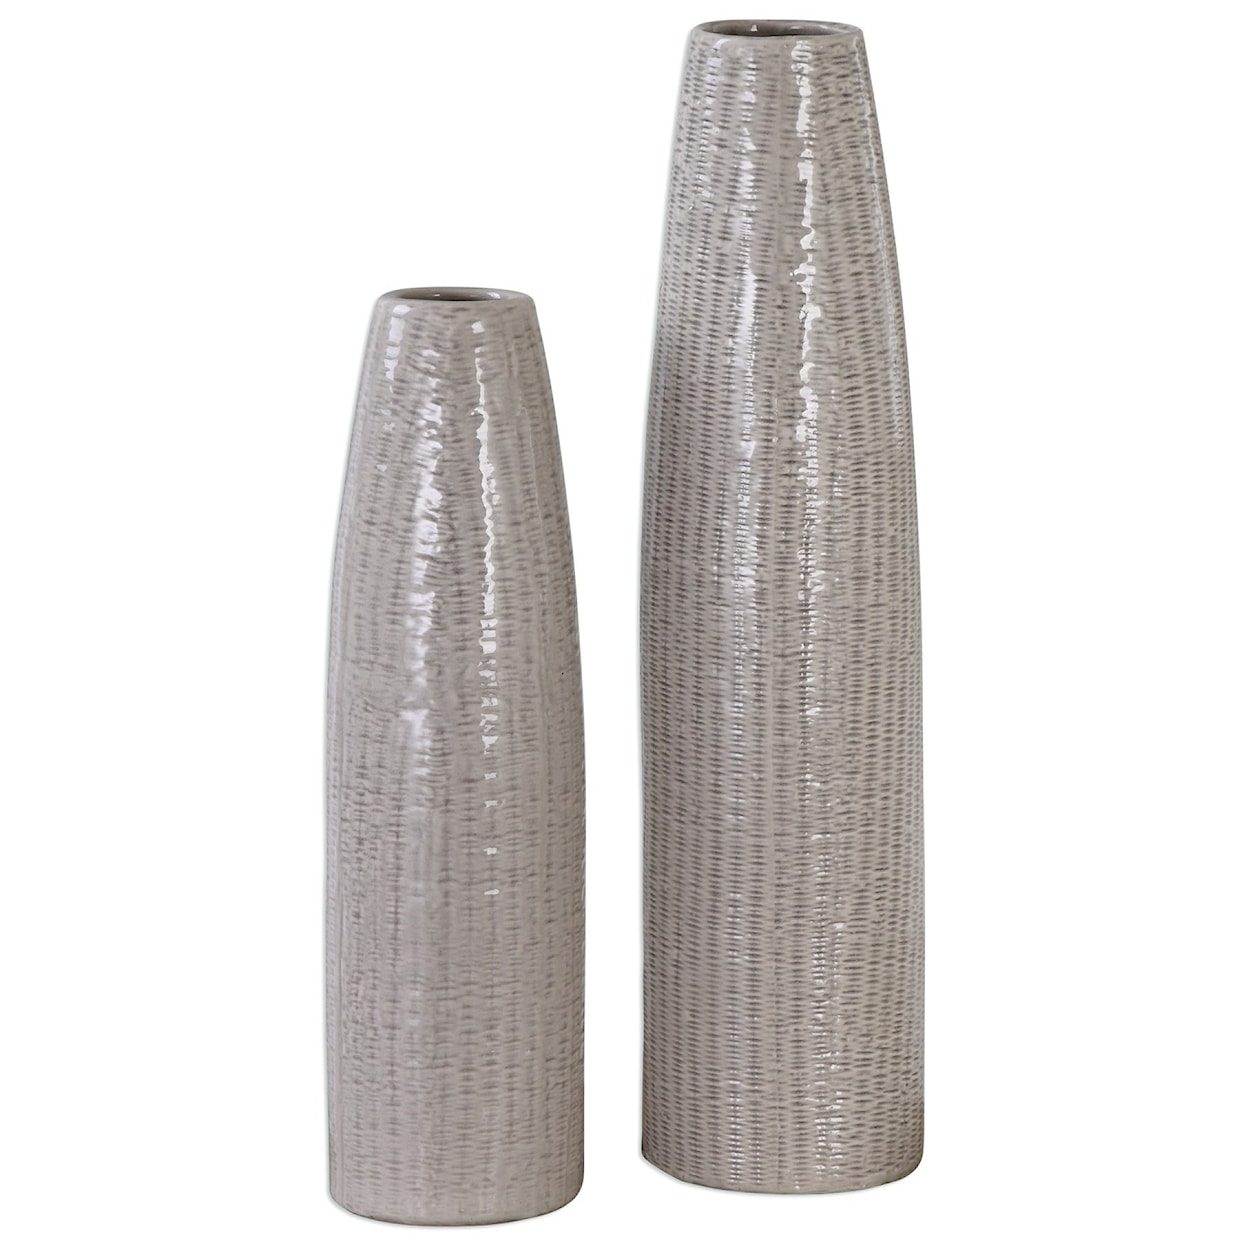 Uttermost Accessories - Vases and Urns Sara Vases (Set of 2)